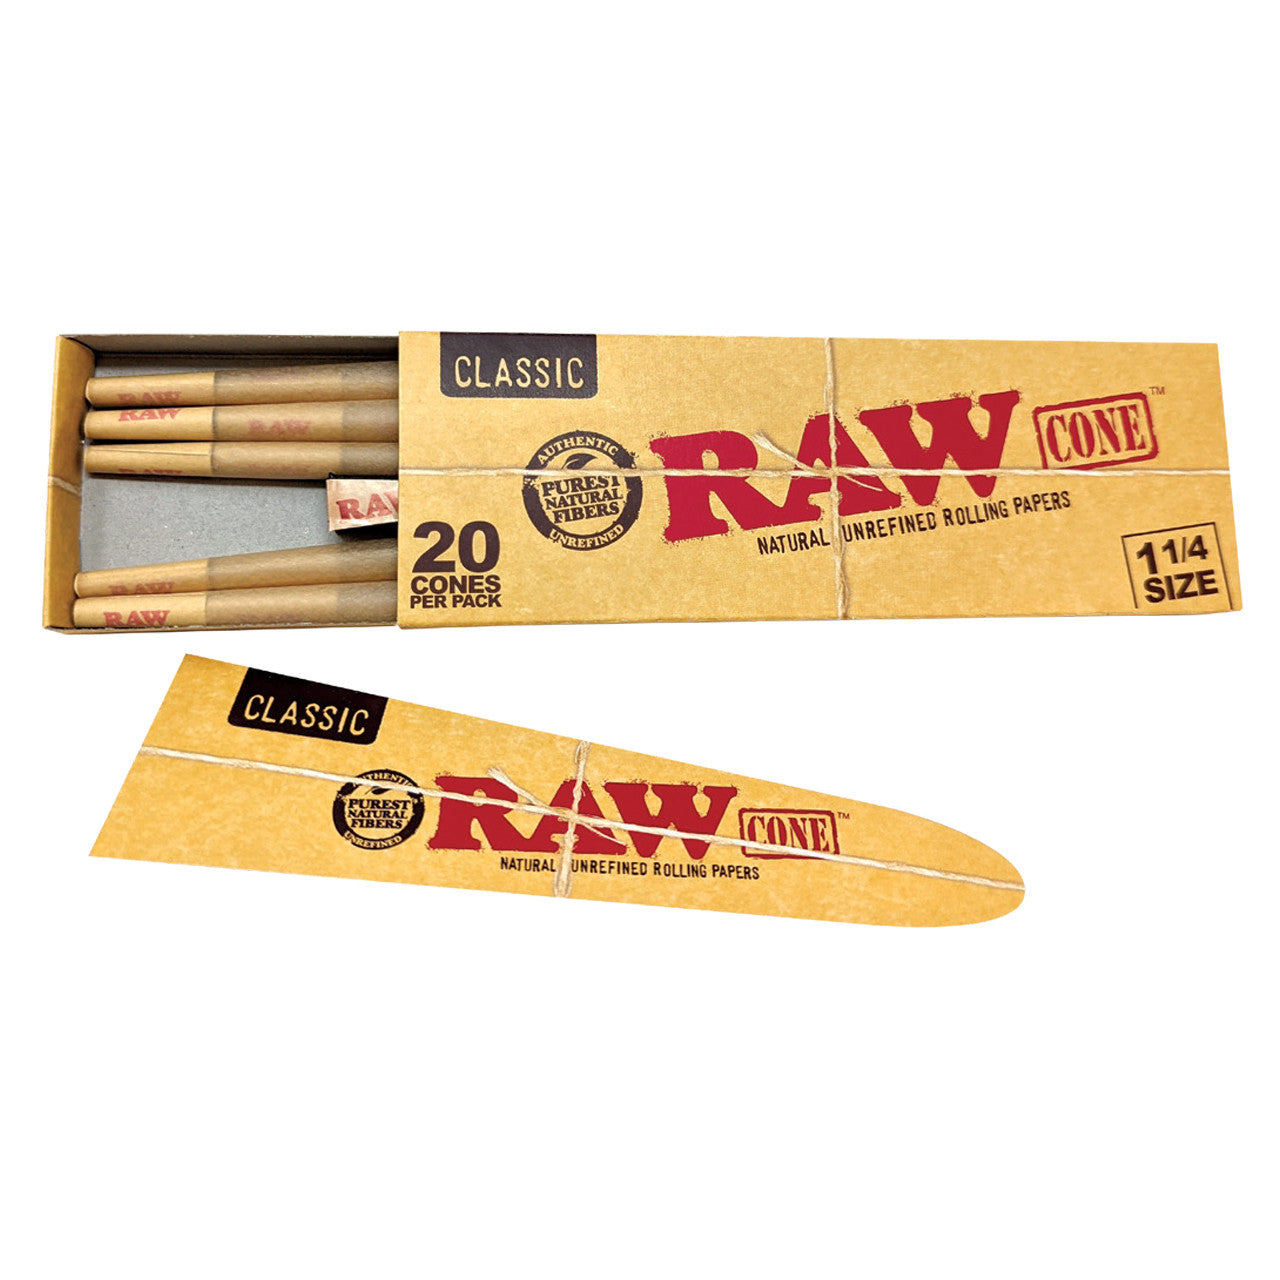 RAW Classic Pre-Roll Cone 1¼ with Funnel (20ct)